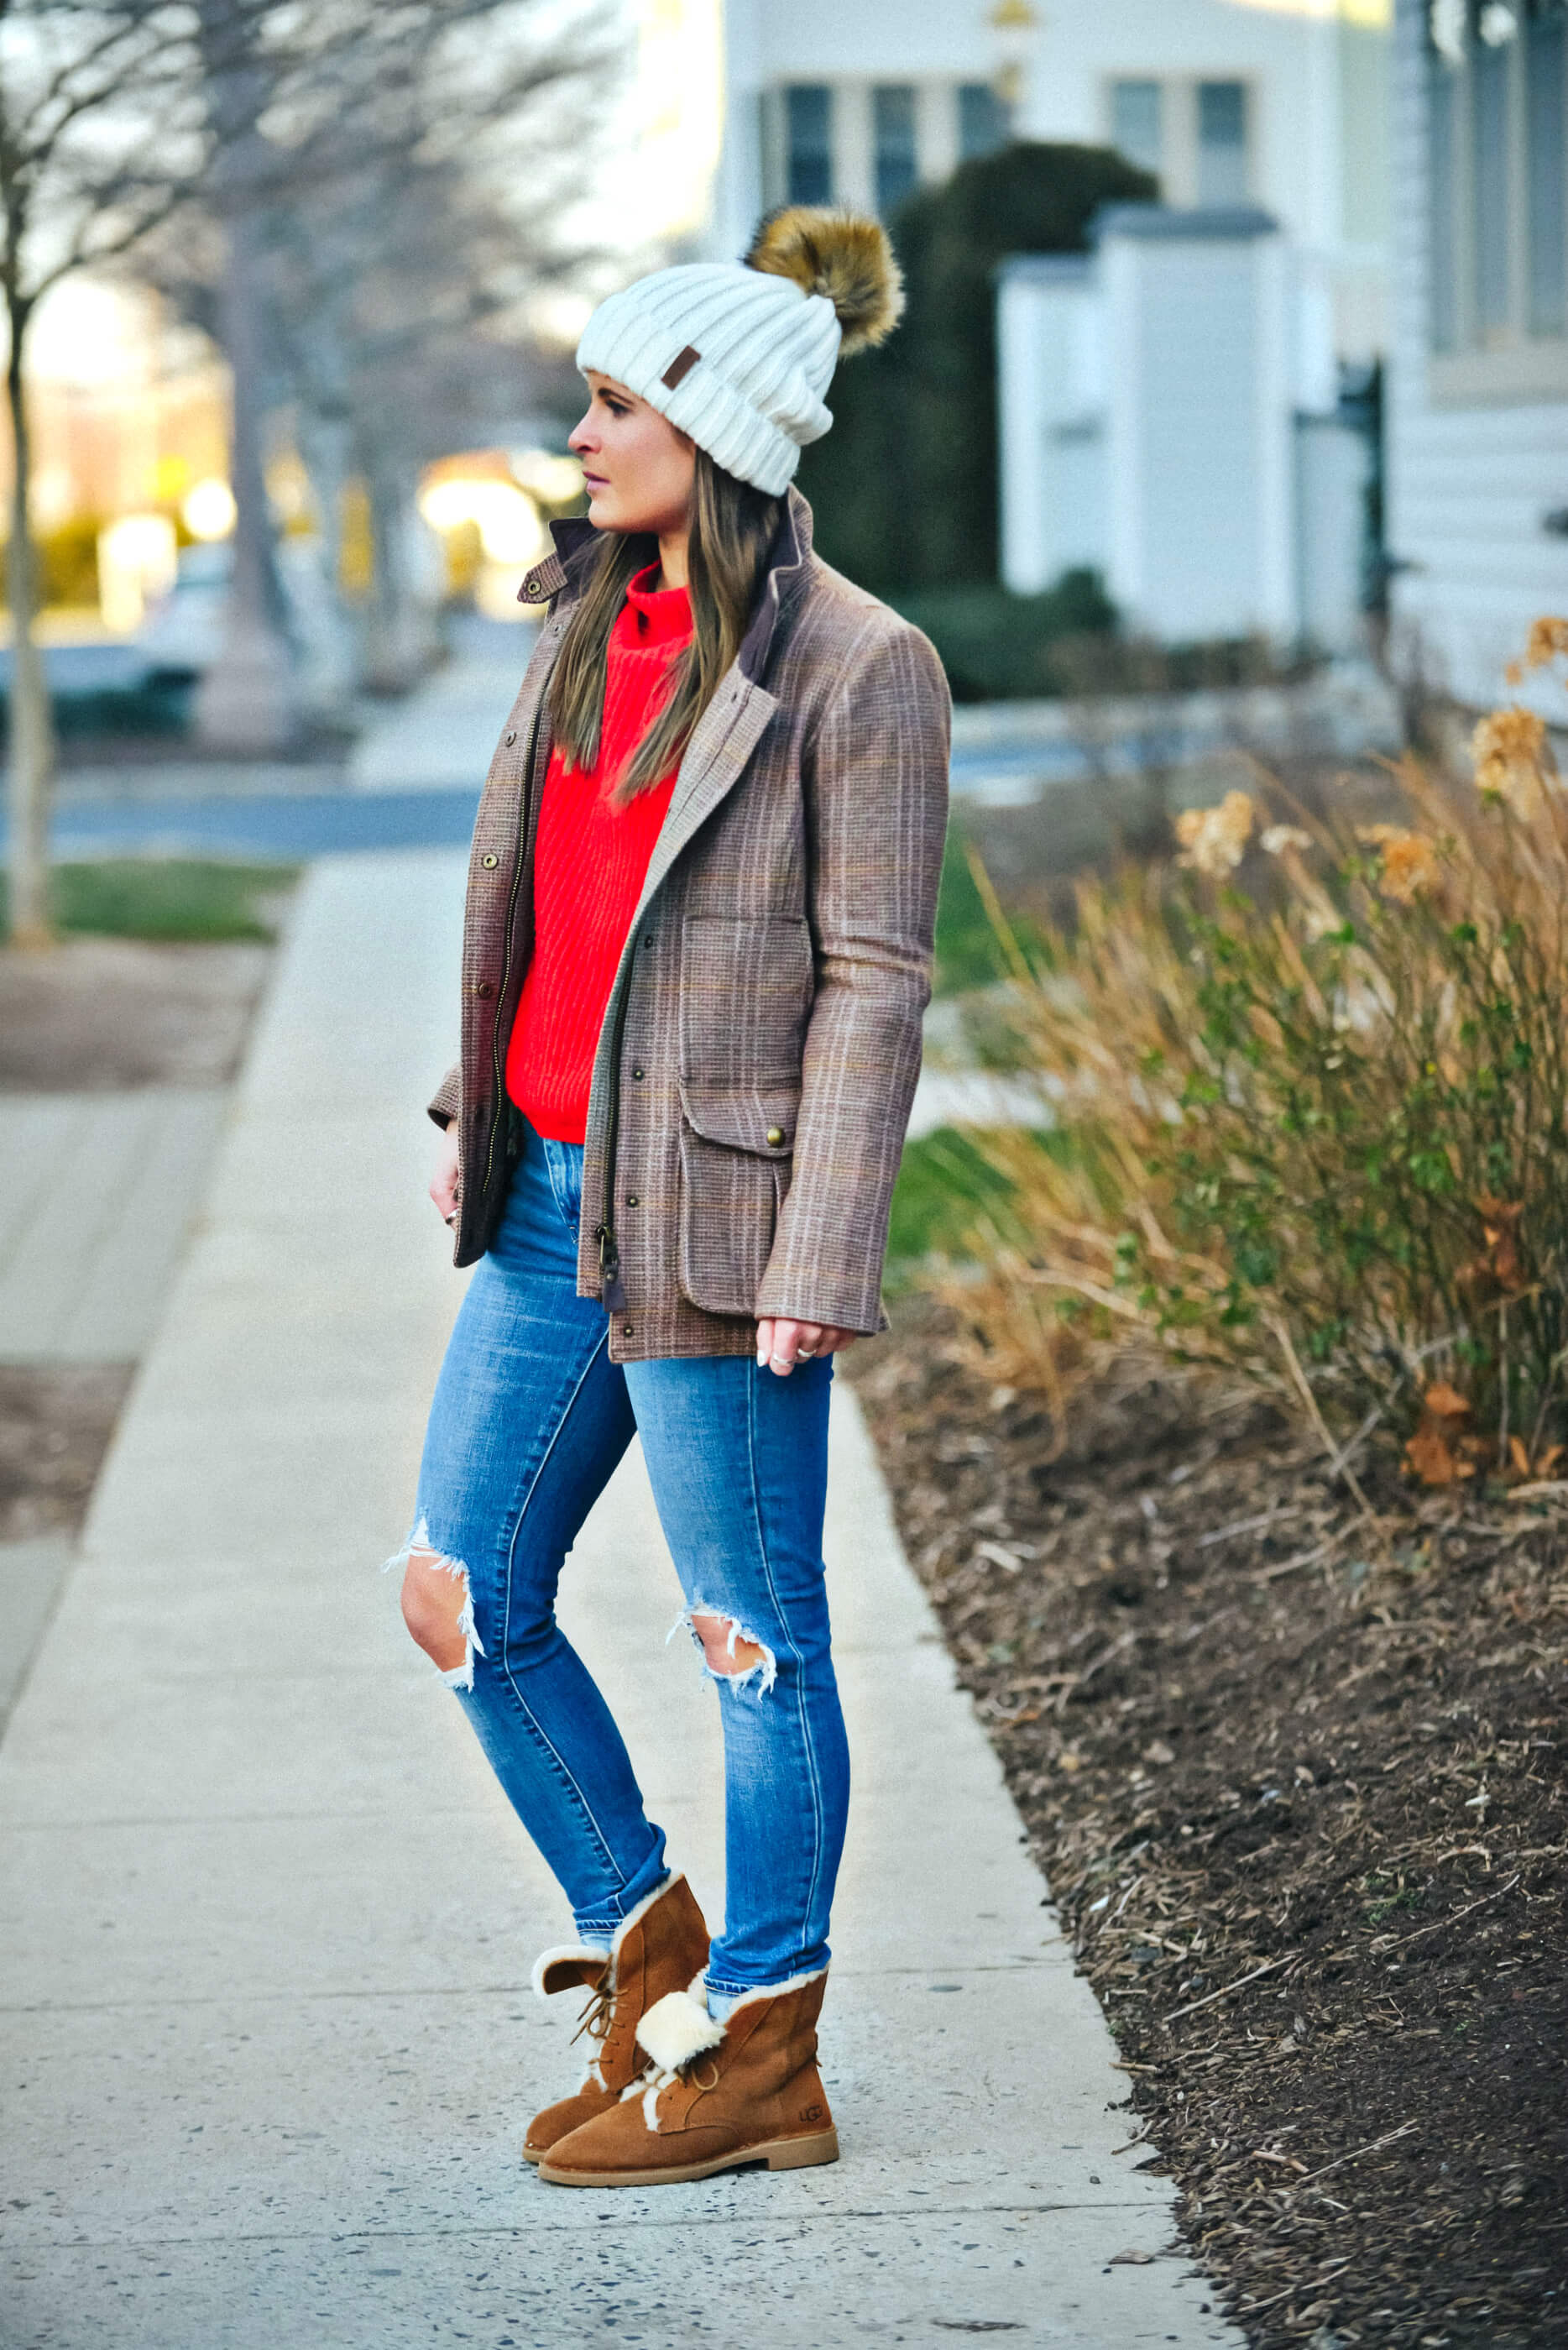 Joules Tweed Fieldcoat, Levi's 721 Denim, Pom Beanie, Winter Outfit, Tilden of To Be Bright